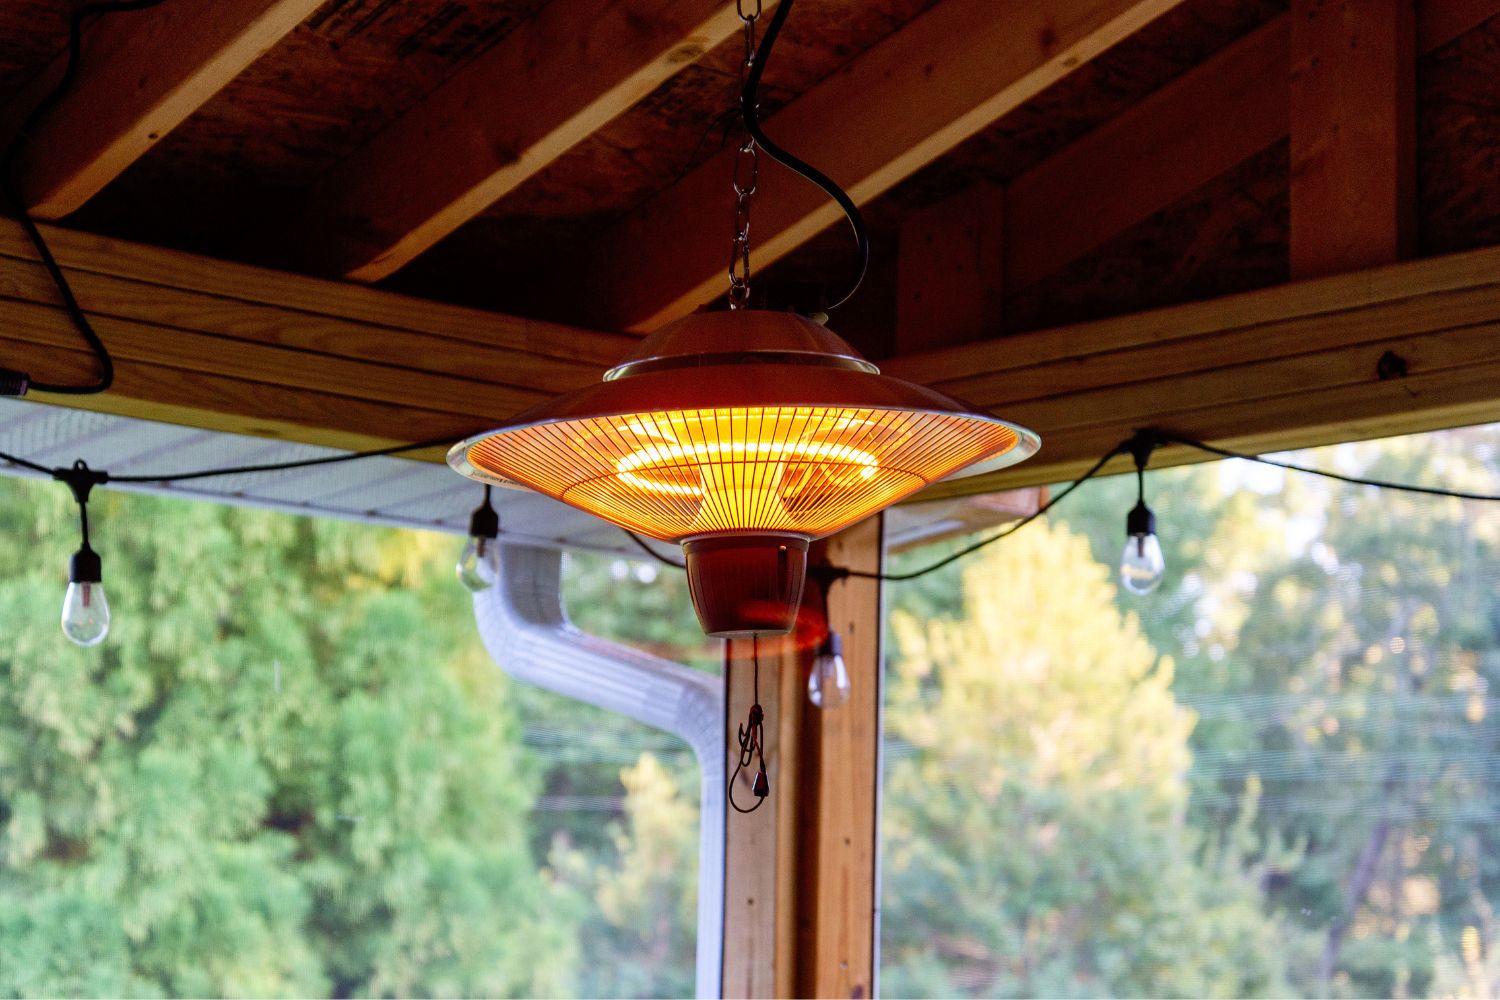 The best patio heater option glowing with warmth on the corner of an outdoor patio.